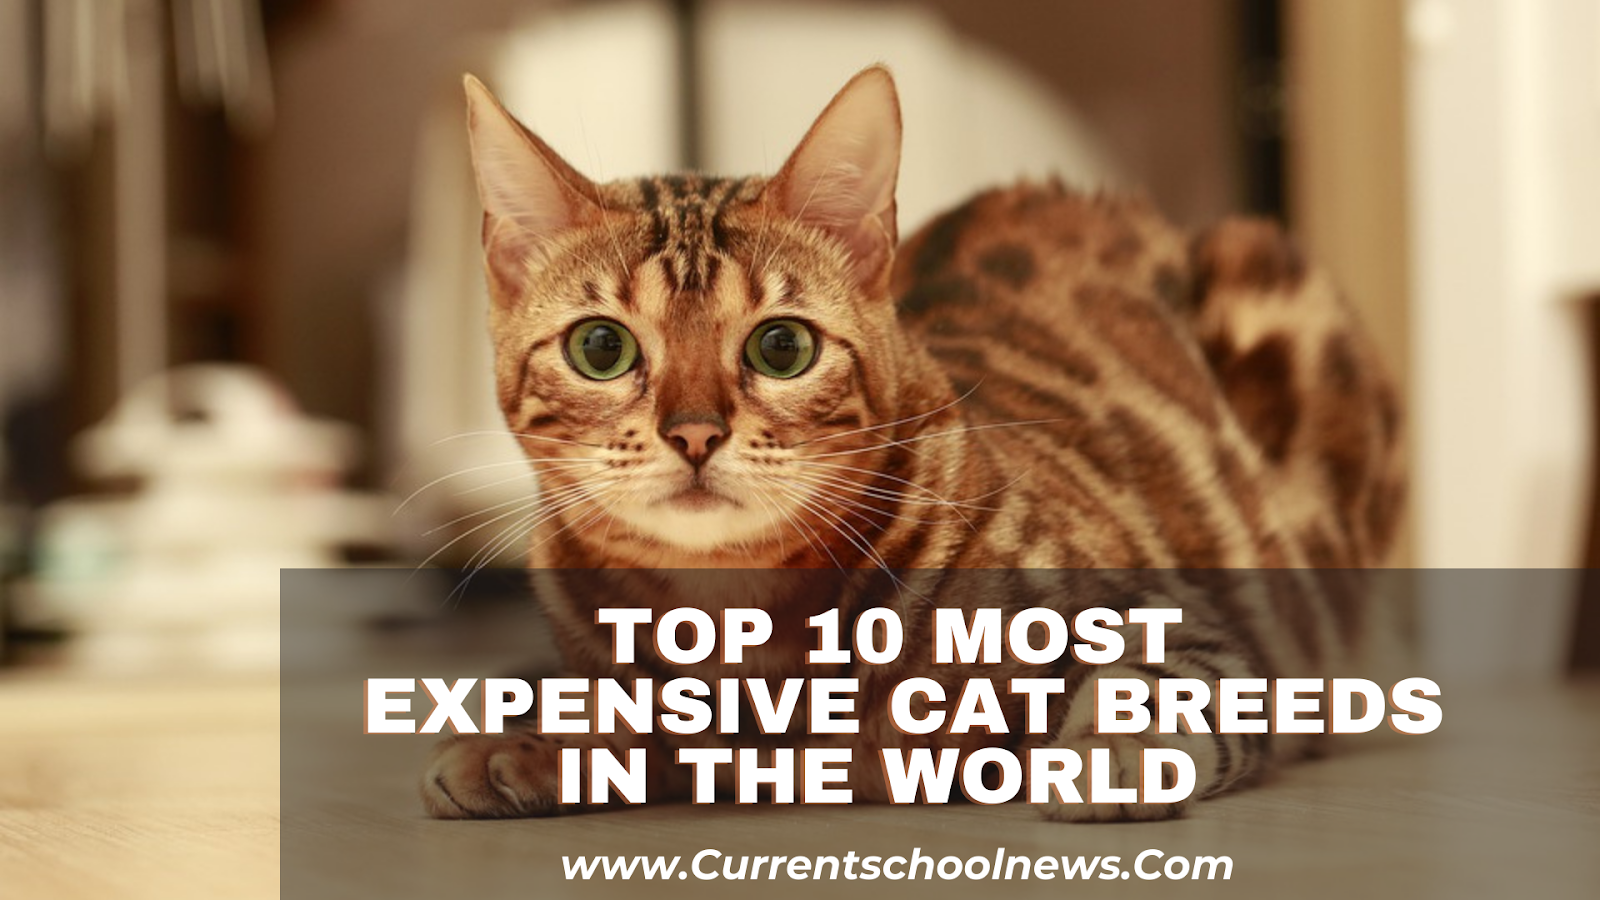 ,most expensive cat 13 million,20 most expensive cat breeds,expensive cat in the world,most expensive cat breeds uk,ashera cat price,5 most expensive cats,expensive cats in philippines,most expensive cat in the world 2022, Top 10 Most Expensive Cat Breeds in the World 2022